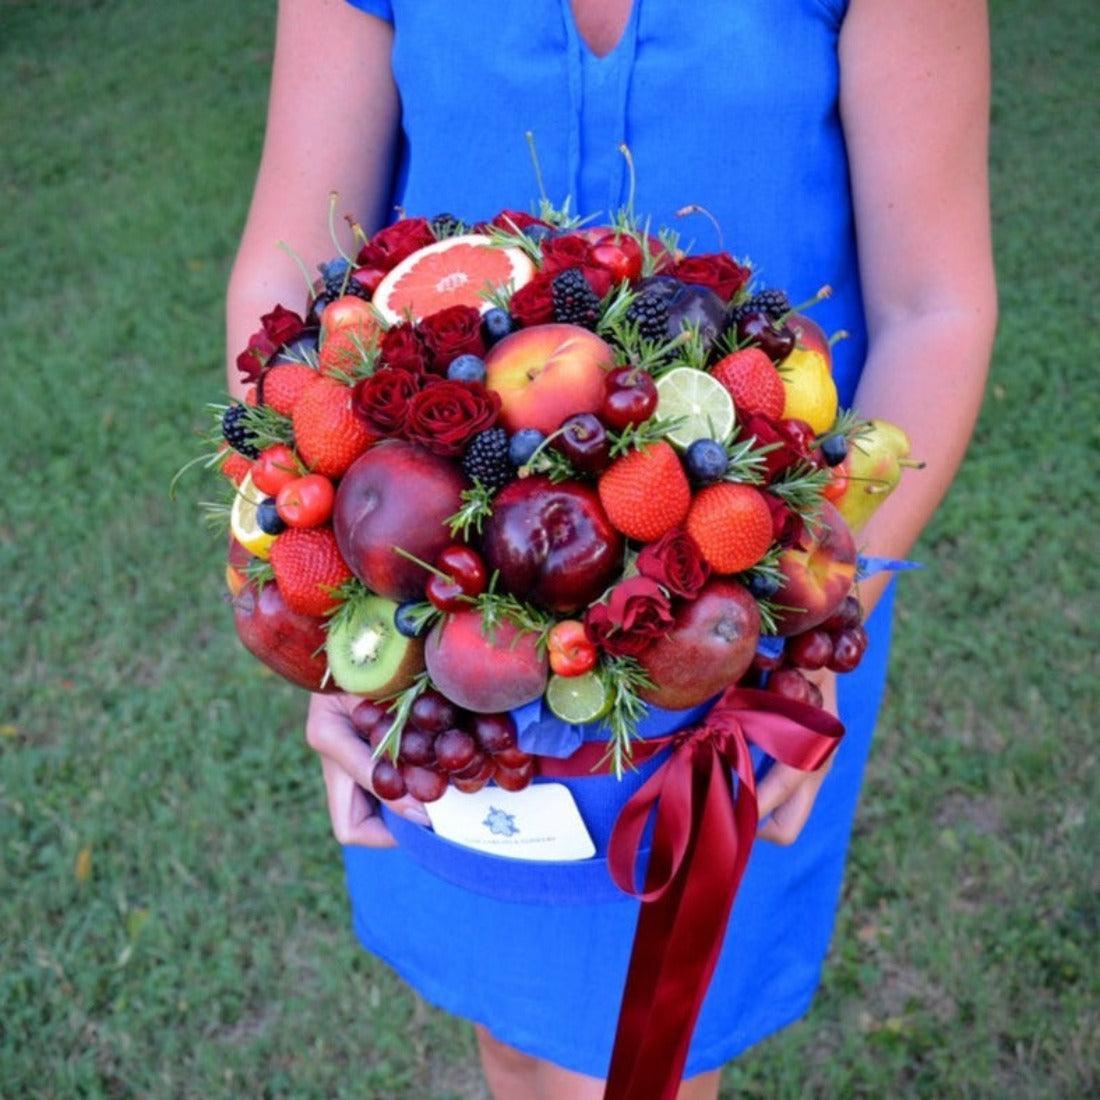 Cherry Wine Story Bouquet - Janes Fruits and Flowers